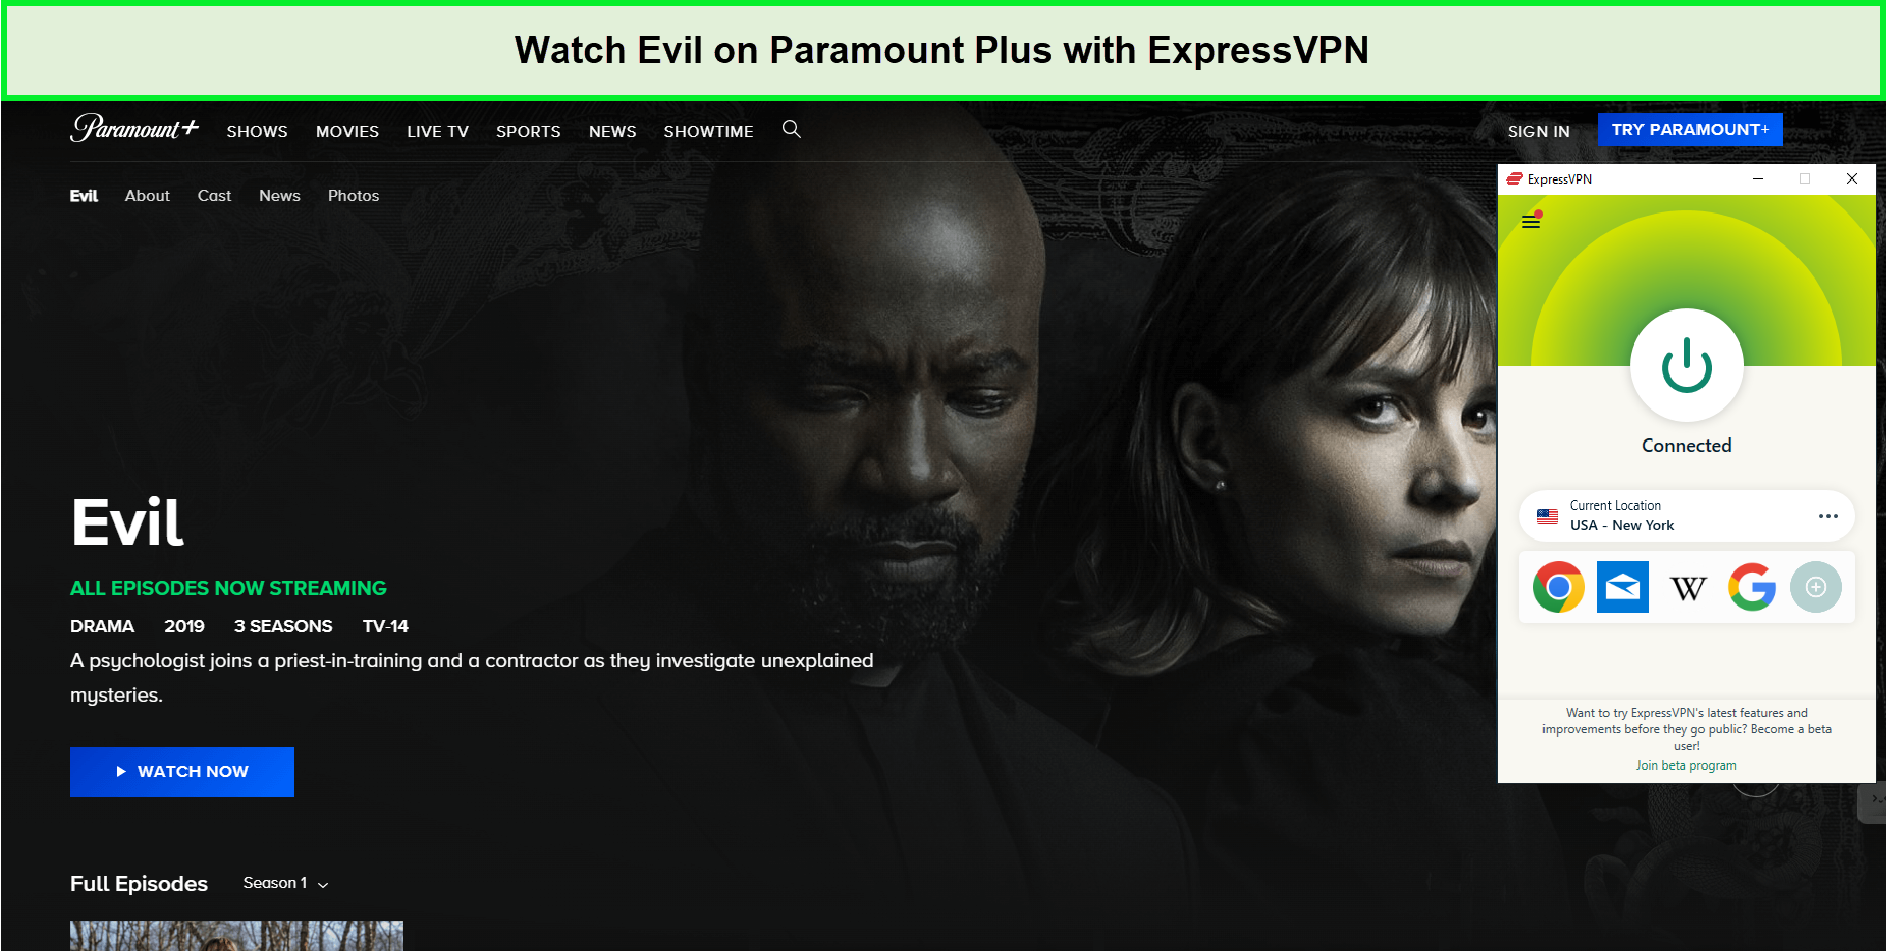 Watch-Evil-Season-4-in-Spain-on-Paramount-Plus-with-ExpressVPN